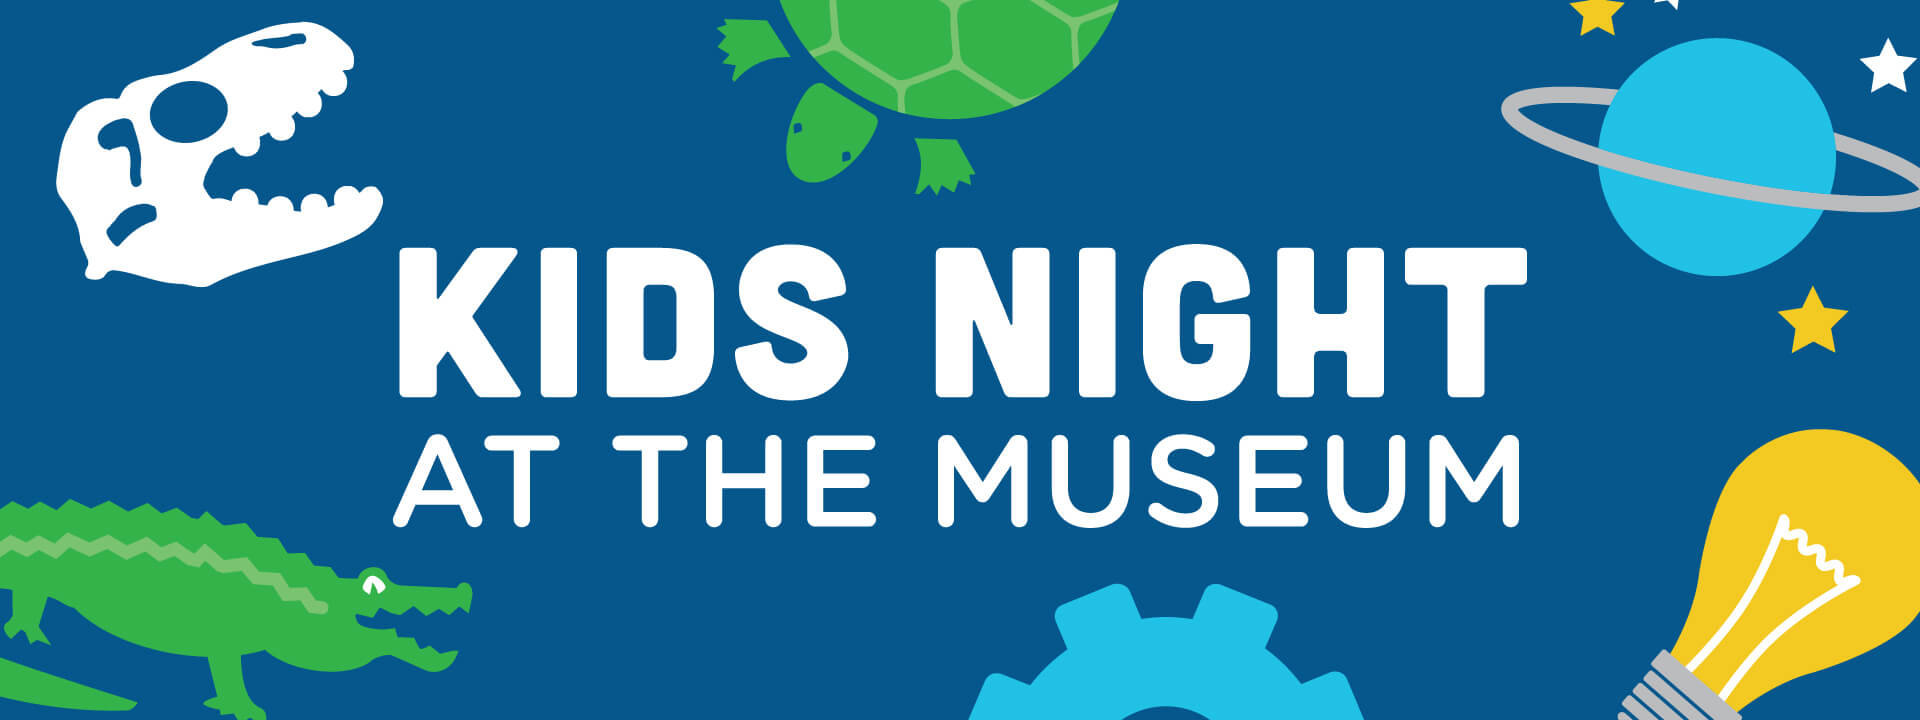 Kids Night at the Museum